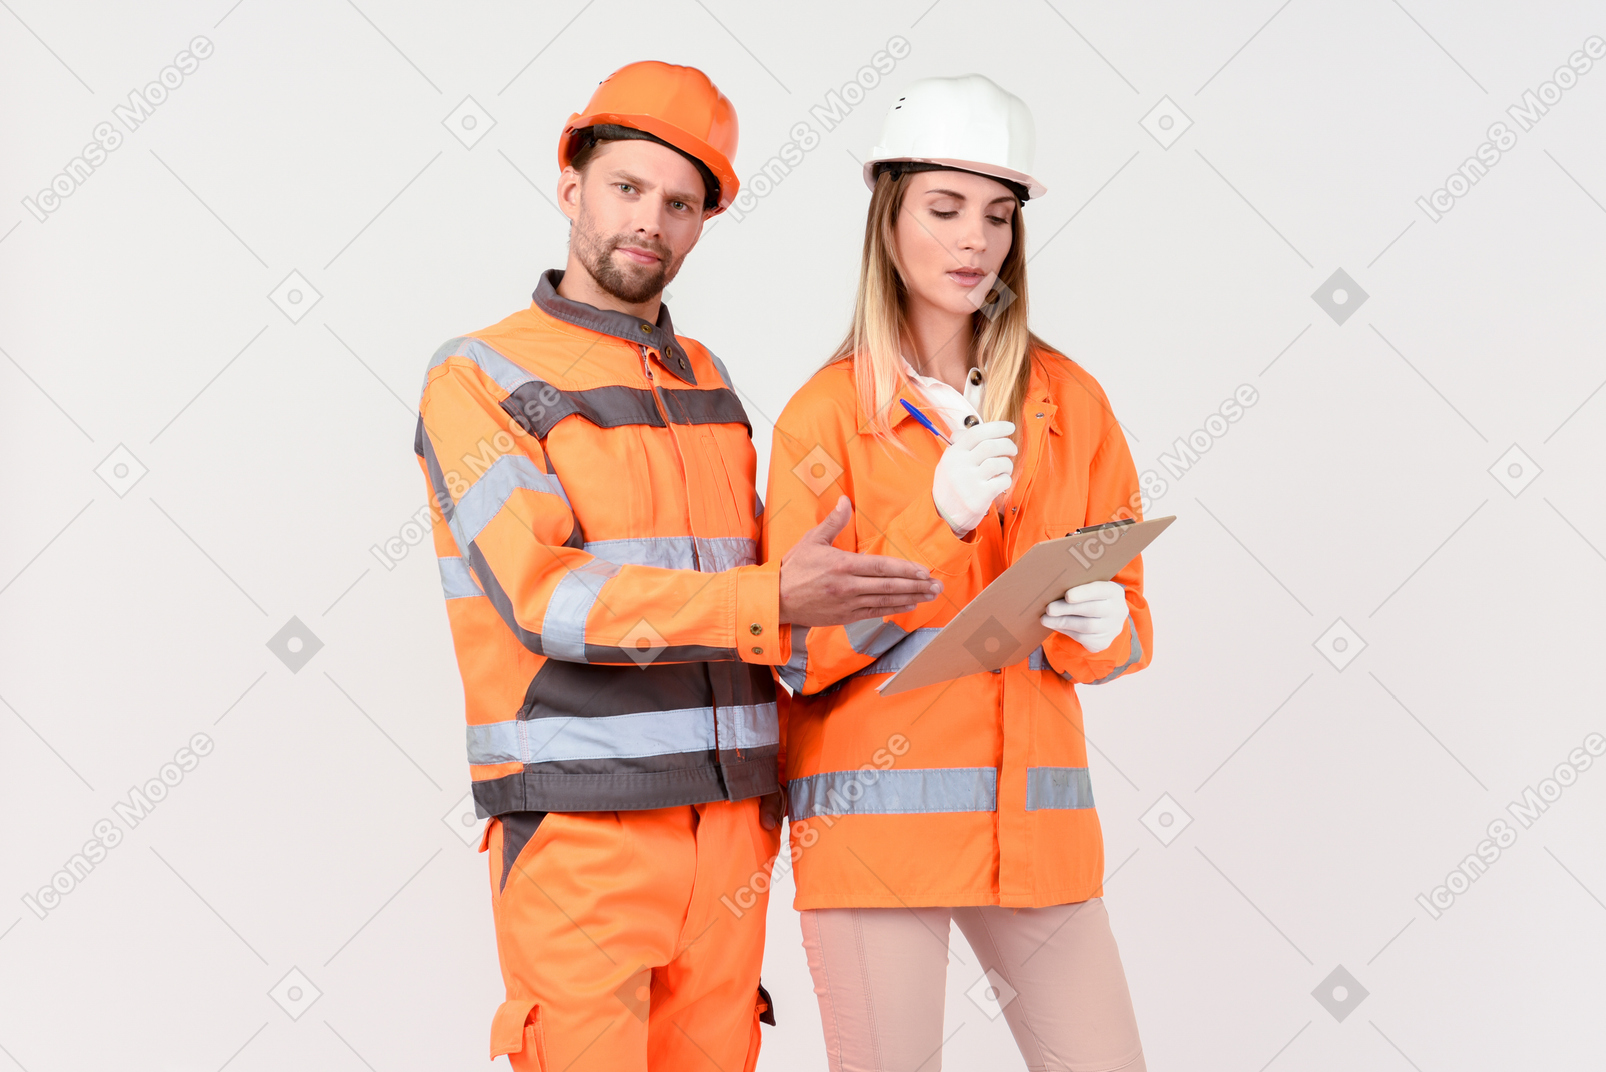 Female and male workers looking at something in the file